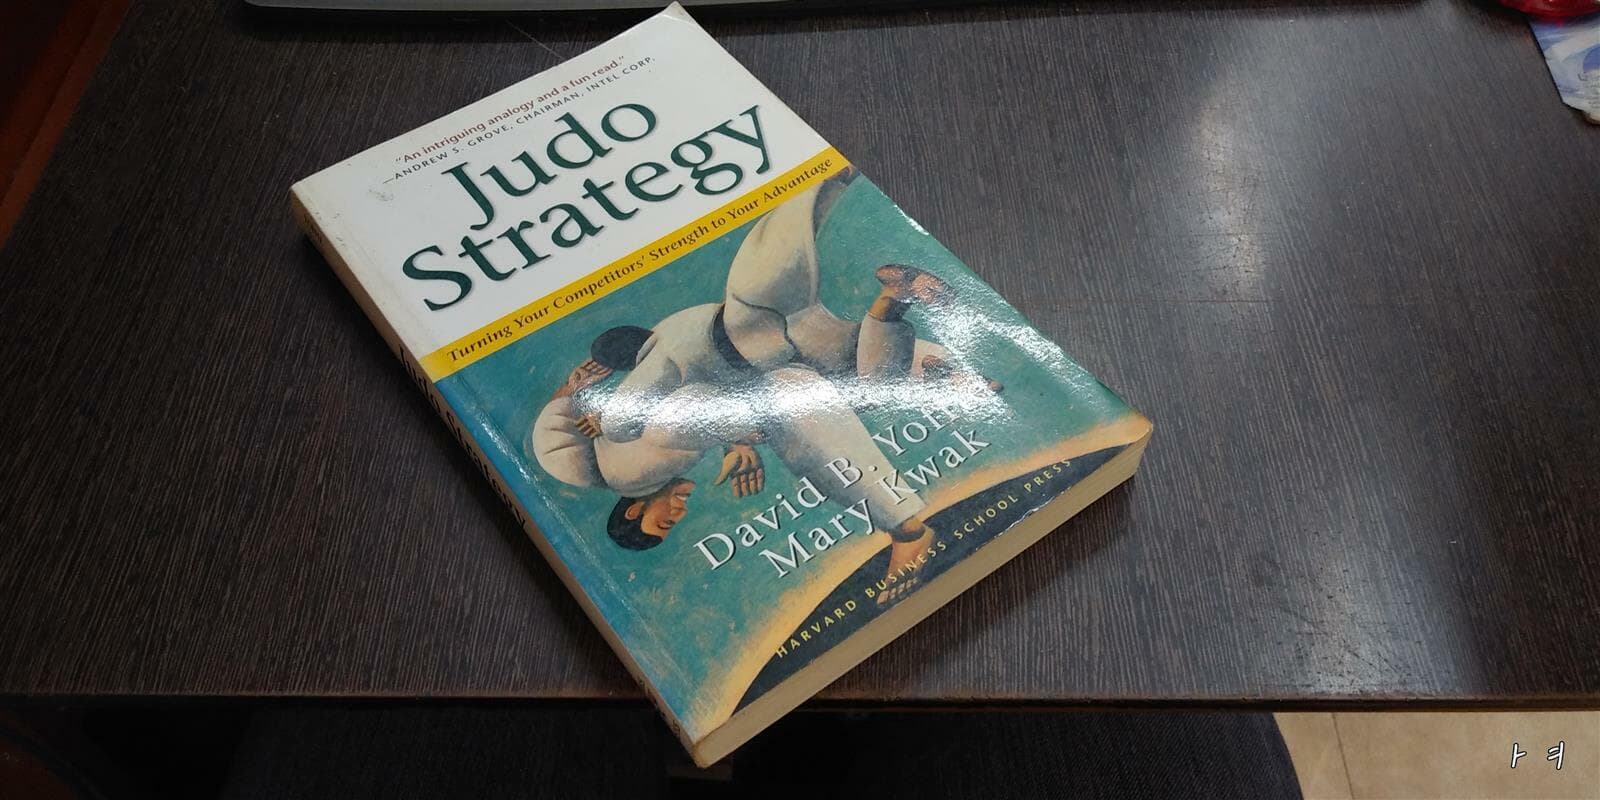 Judo Strategy: Turning Your Competitors Strength to Your Advantage